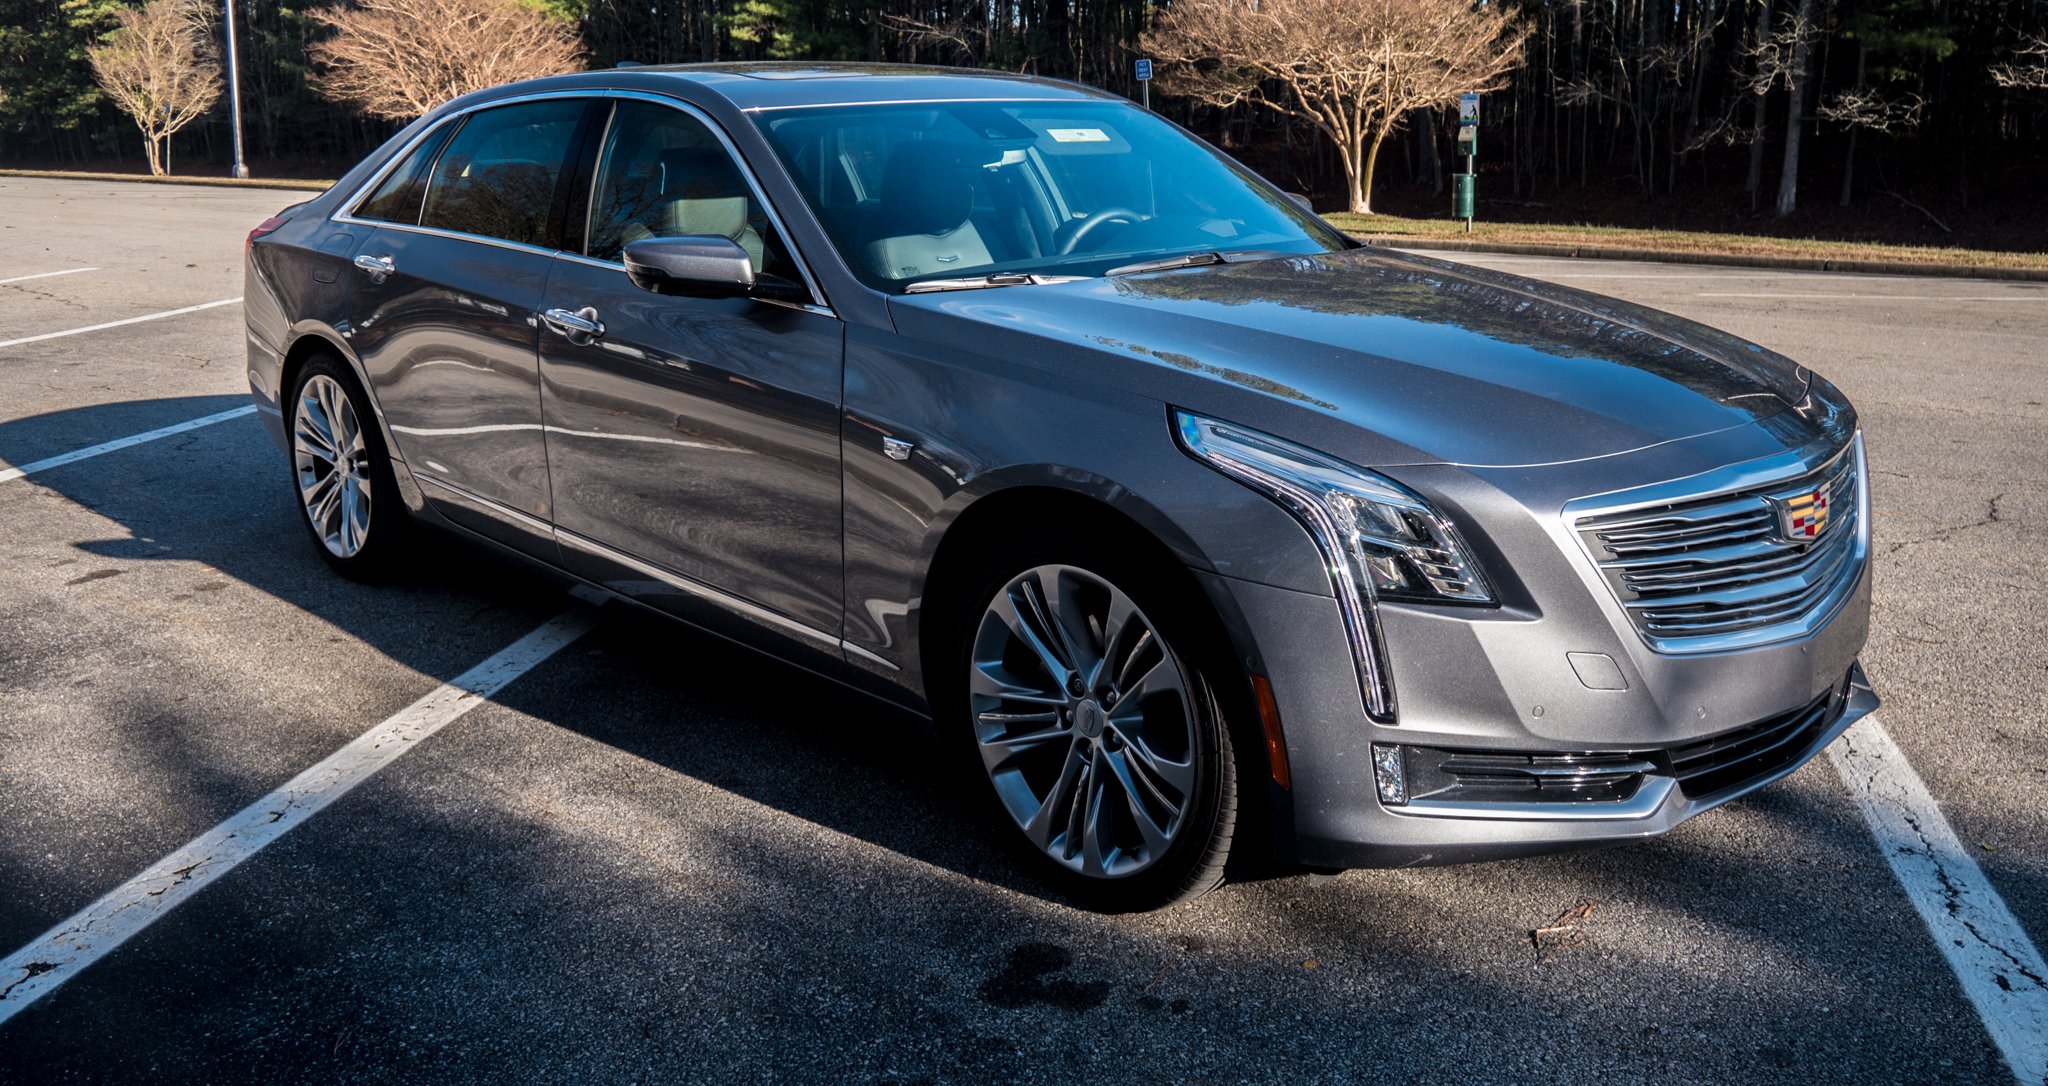 The Cadillac CT6 review: Super Cruise is a game-changer | Ars Technica